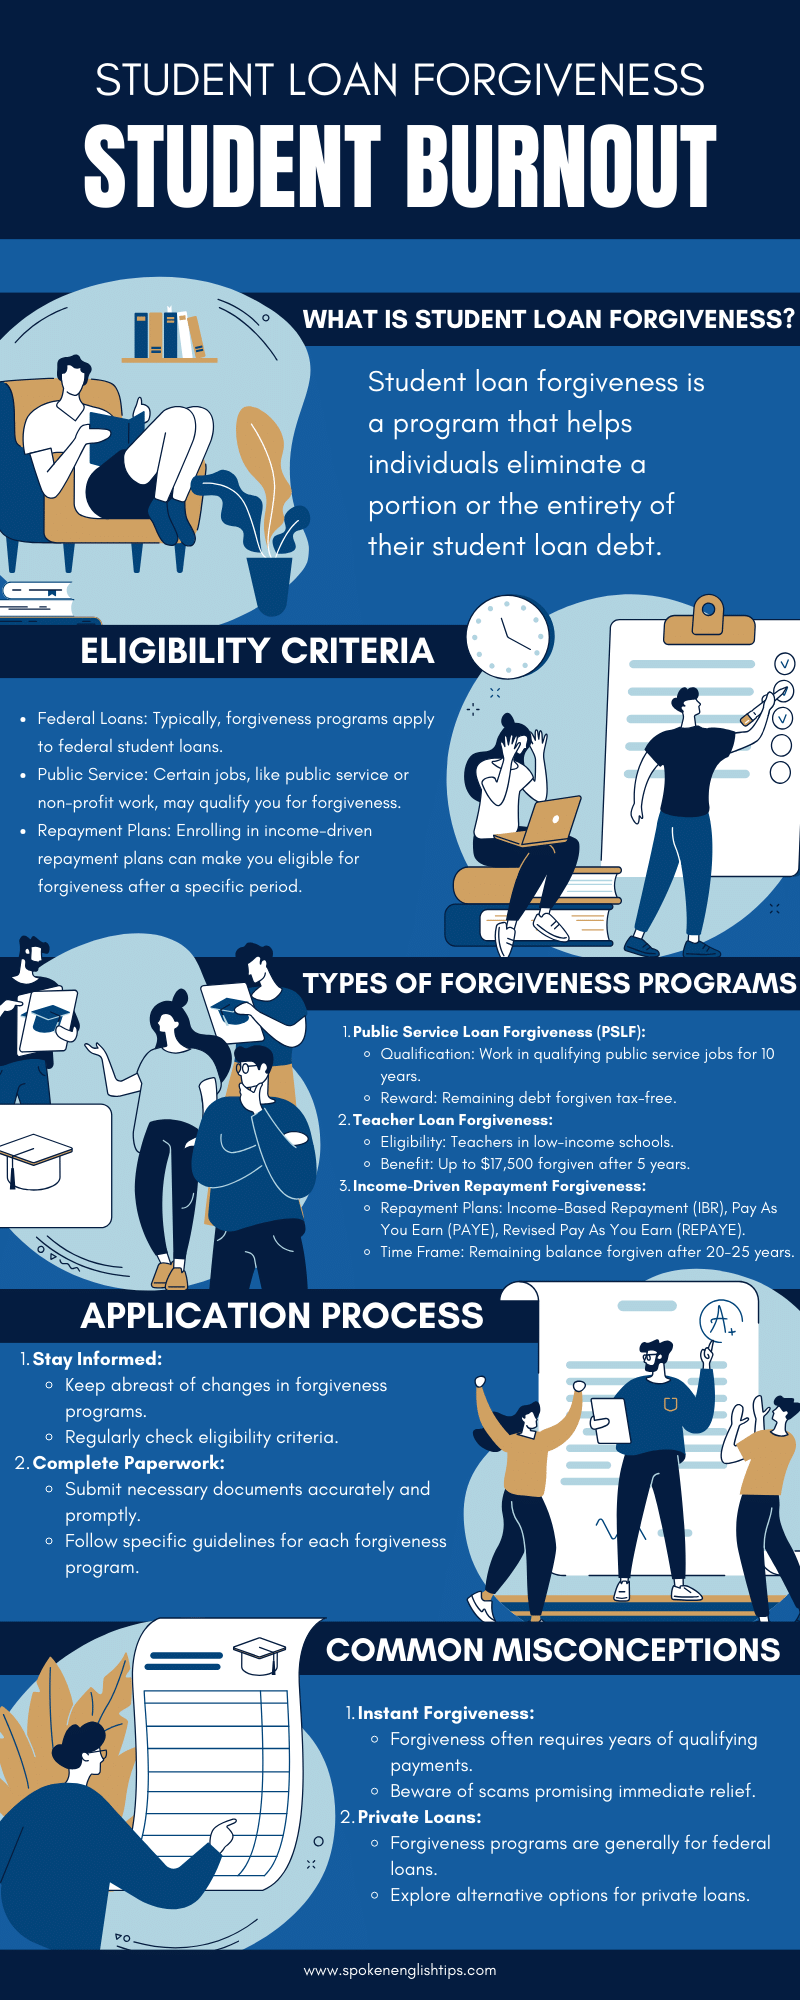 Student Loan Forgiveness infographic